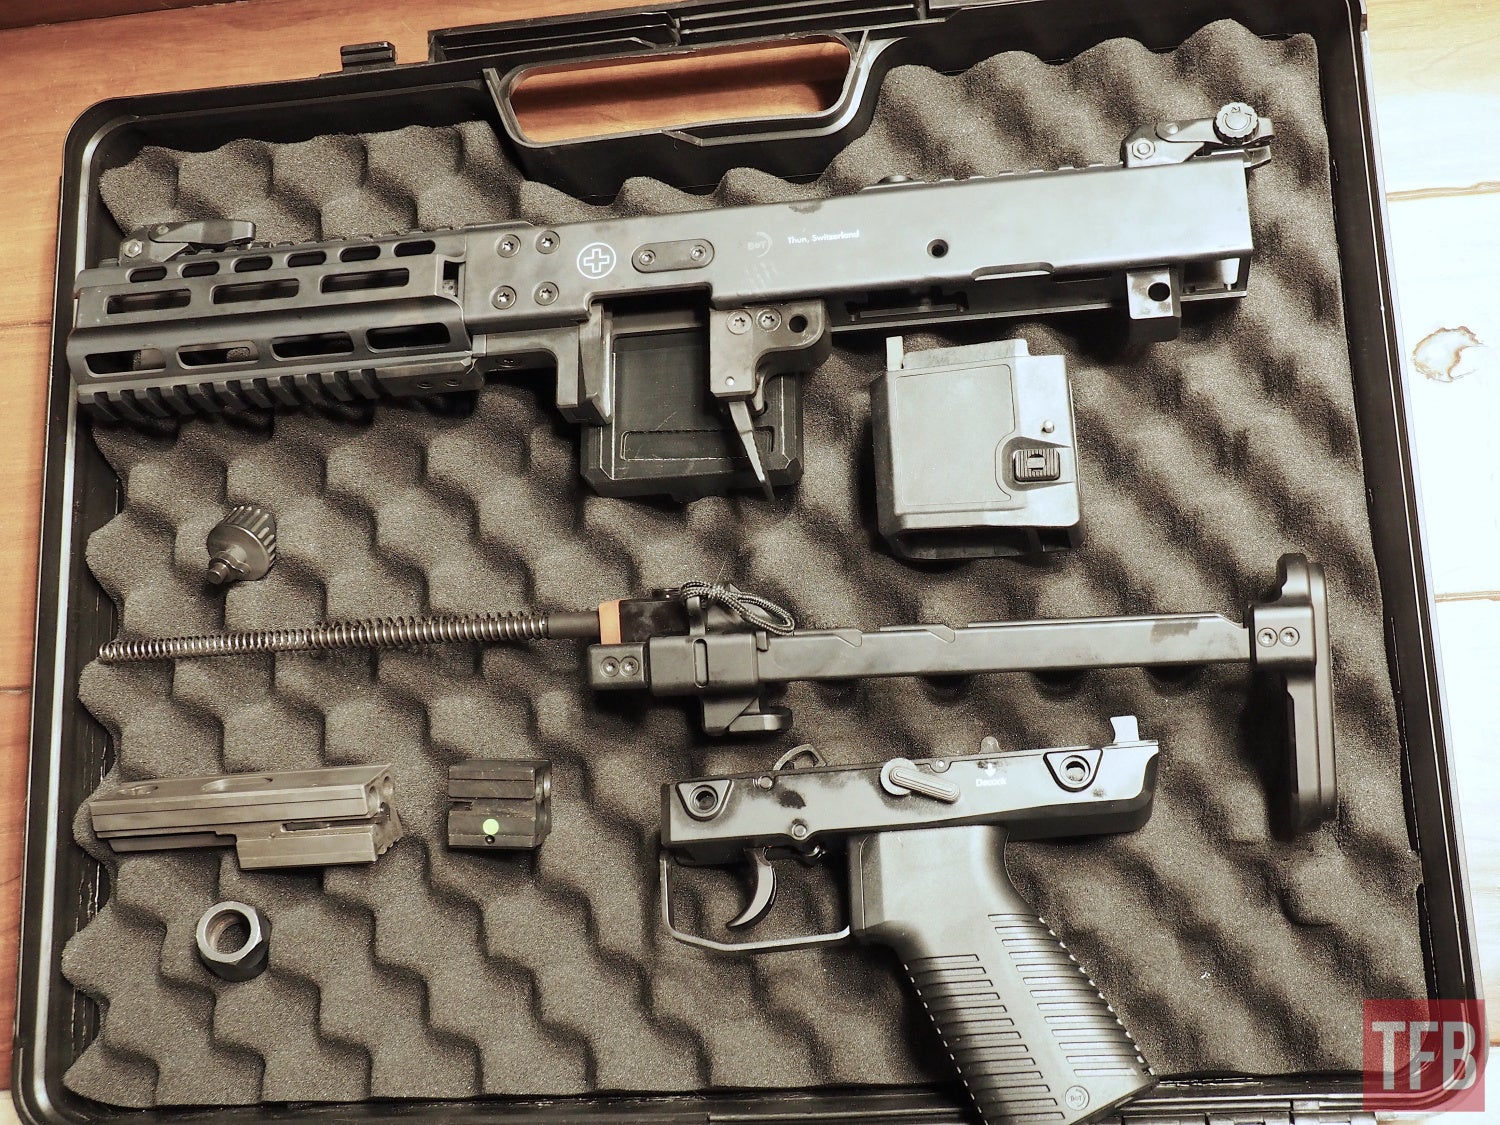 B&T KH9SD disassembled for cleaning